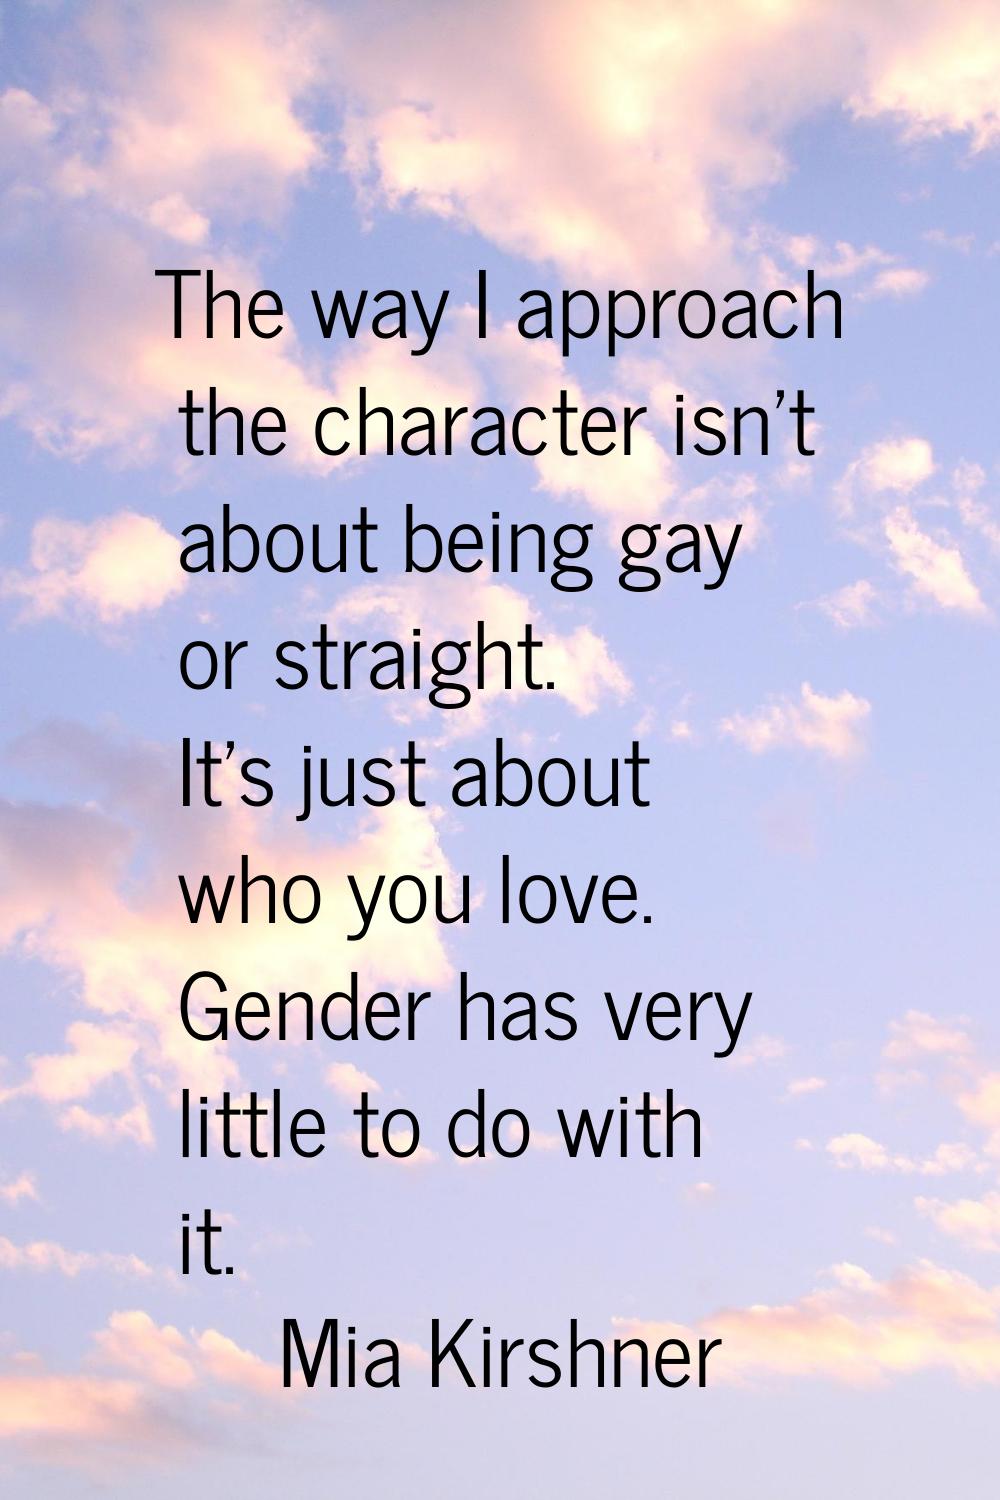 The way I approach the character isn't about being gay or straight. It's just about who you love. G